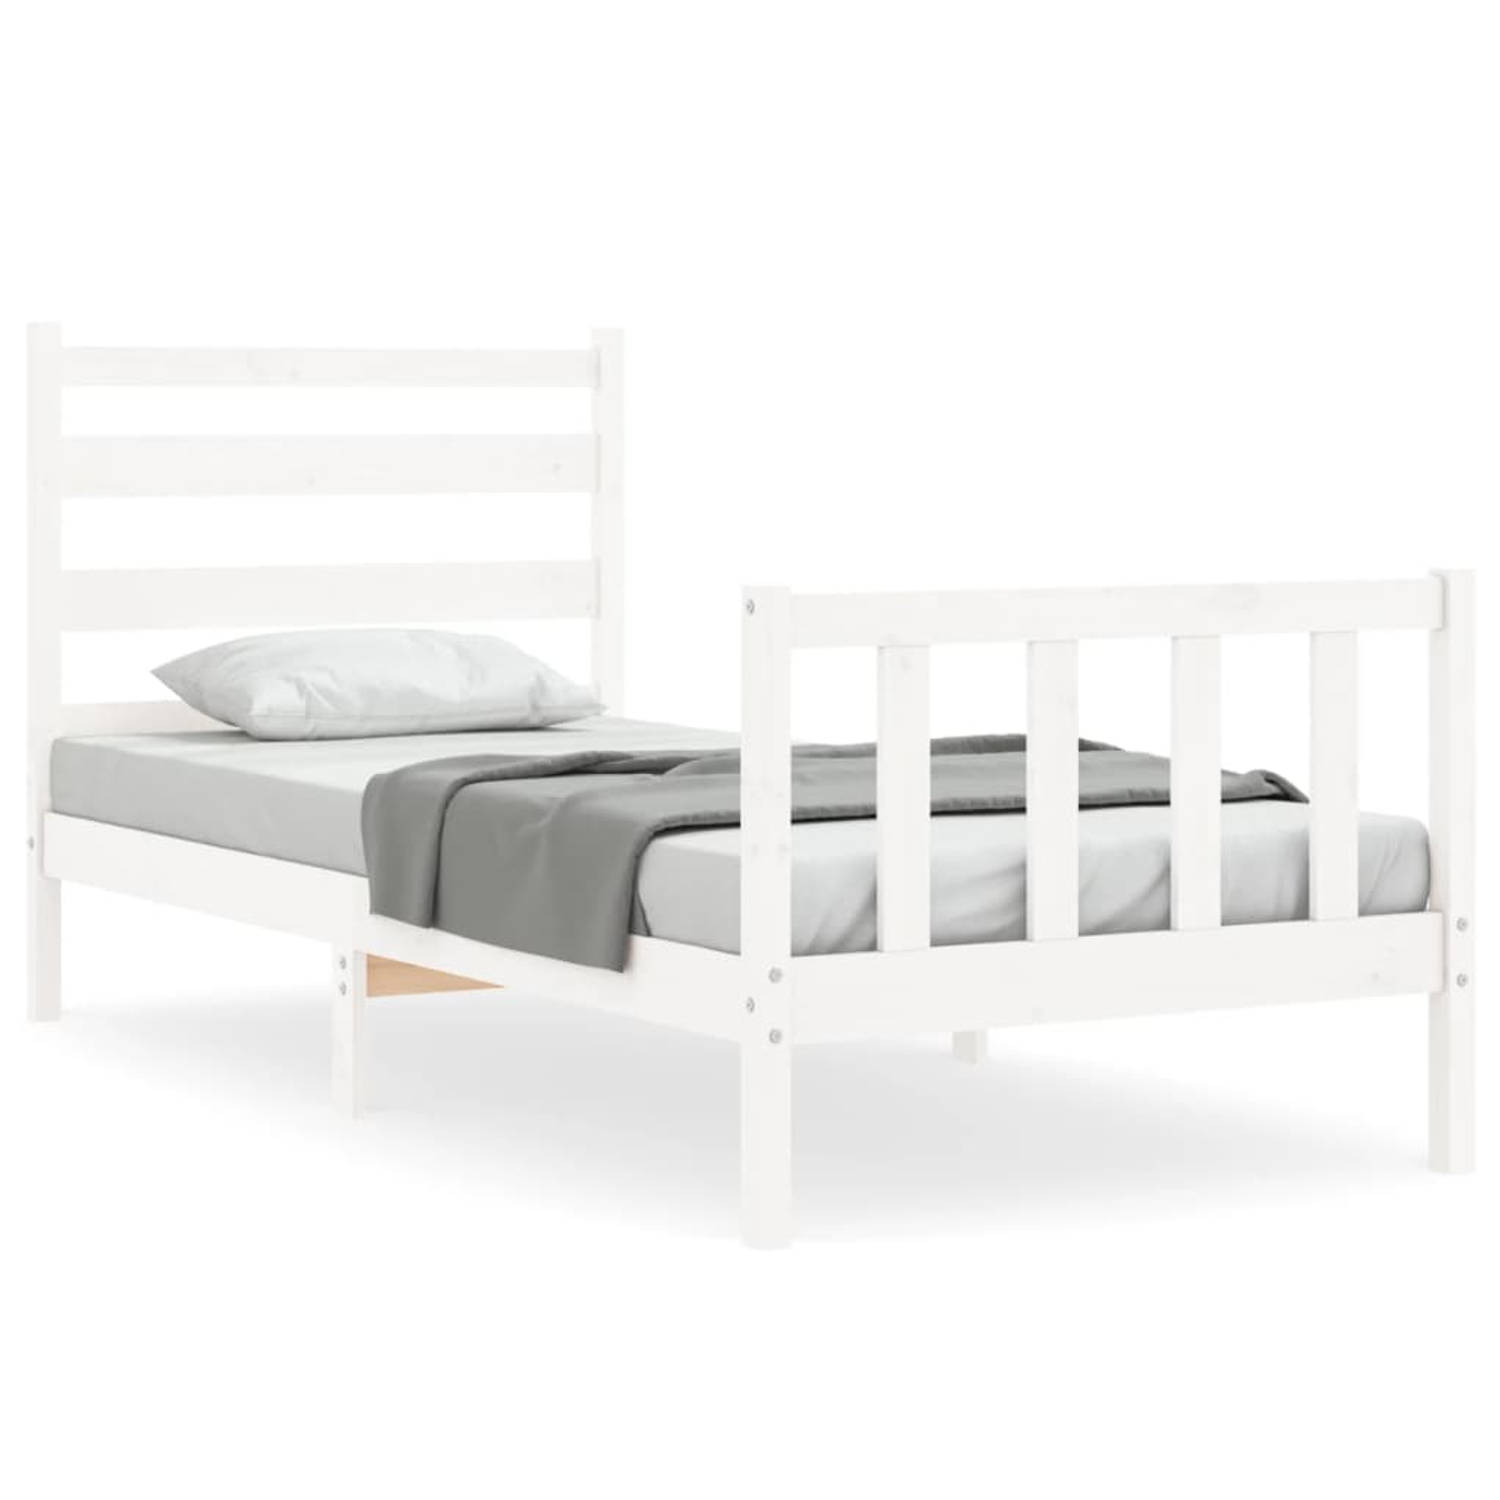 The Living Store Bed Grenenhout - Massief - 206 x 105.5 x 100 cm - Wit